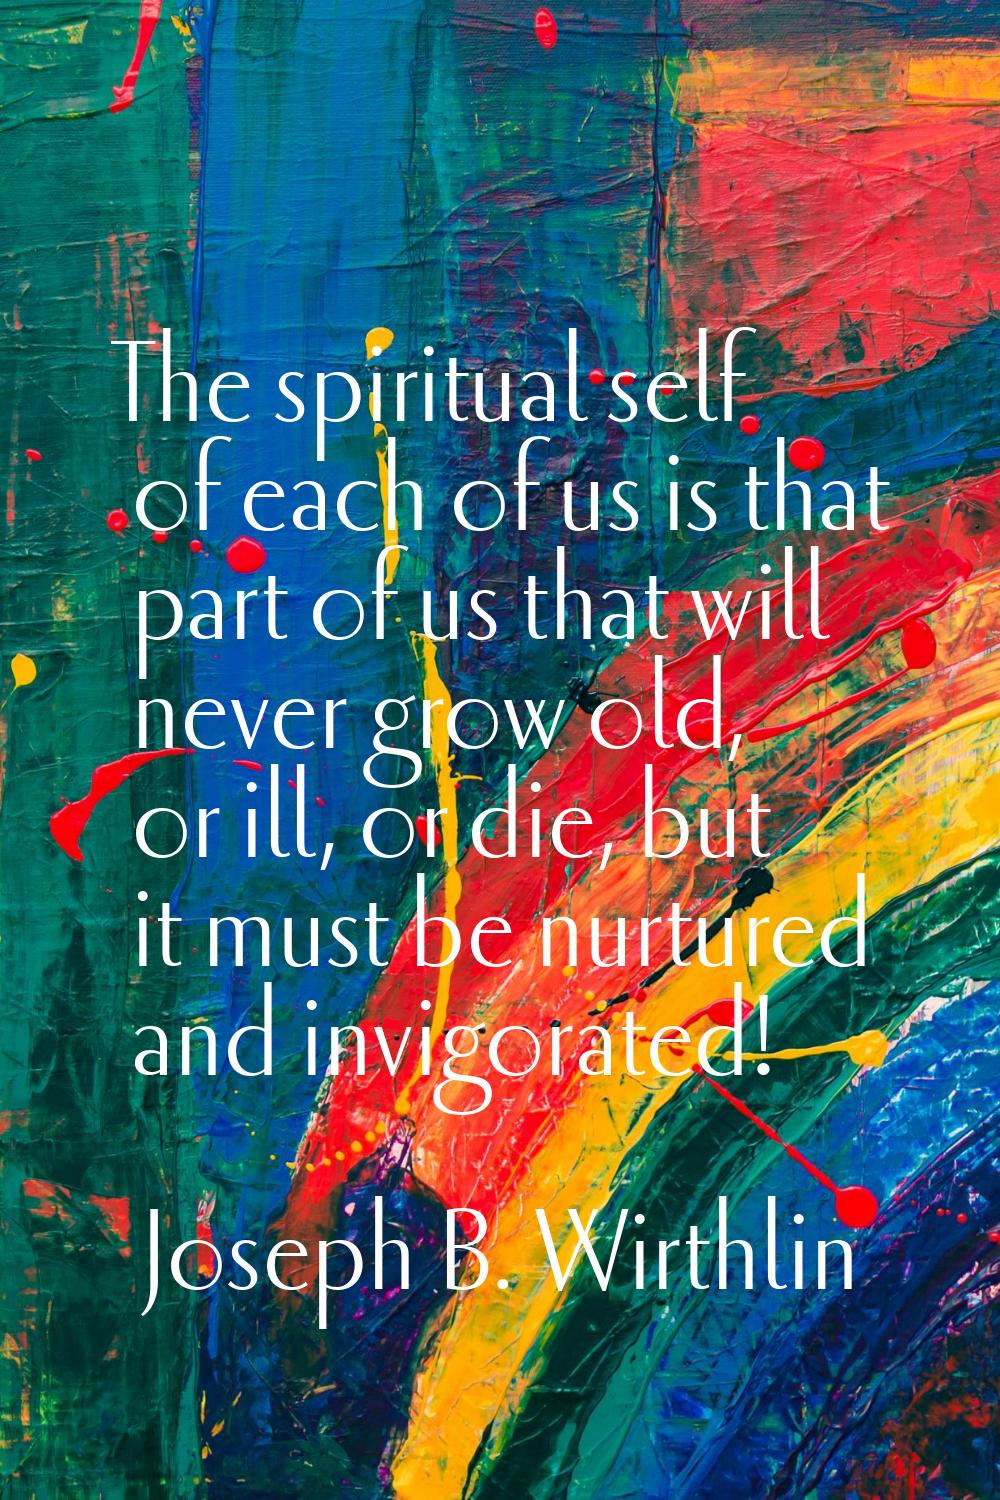 The spiritual self of each of us is that part of us that will never grow old, or ill, or die, but i